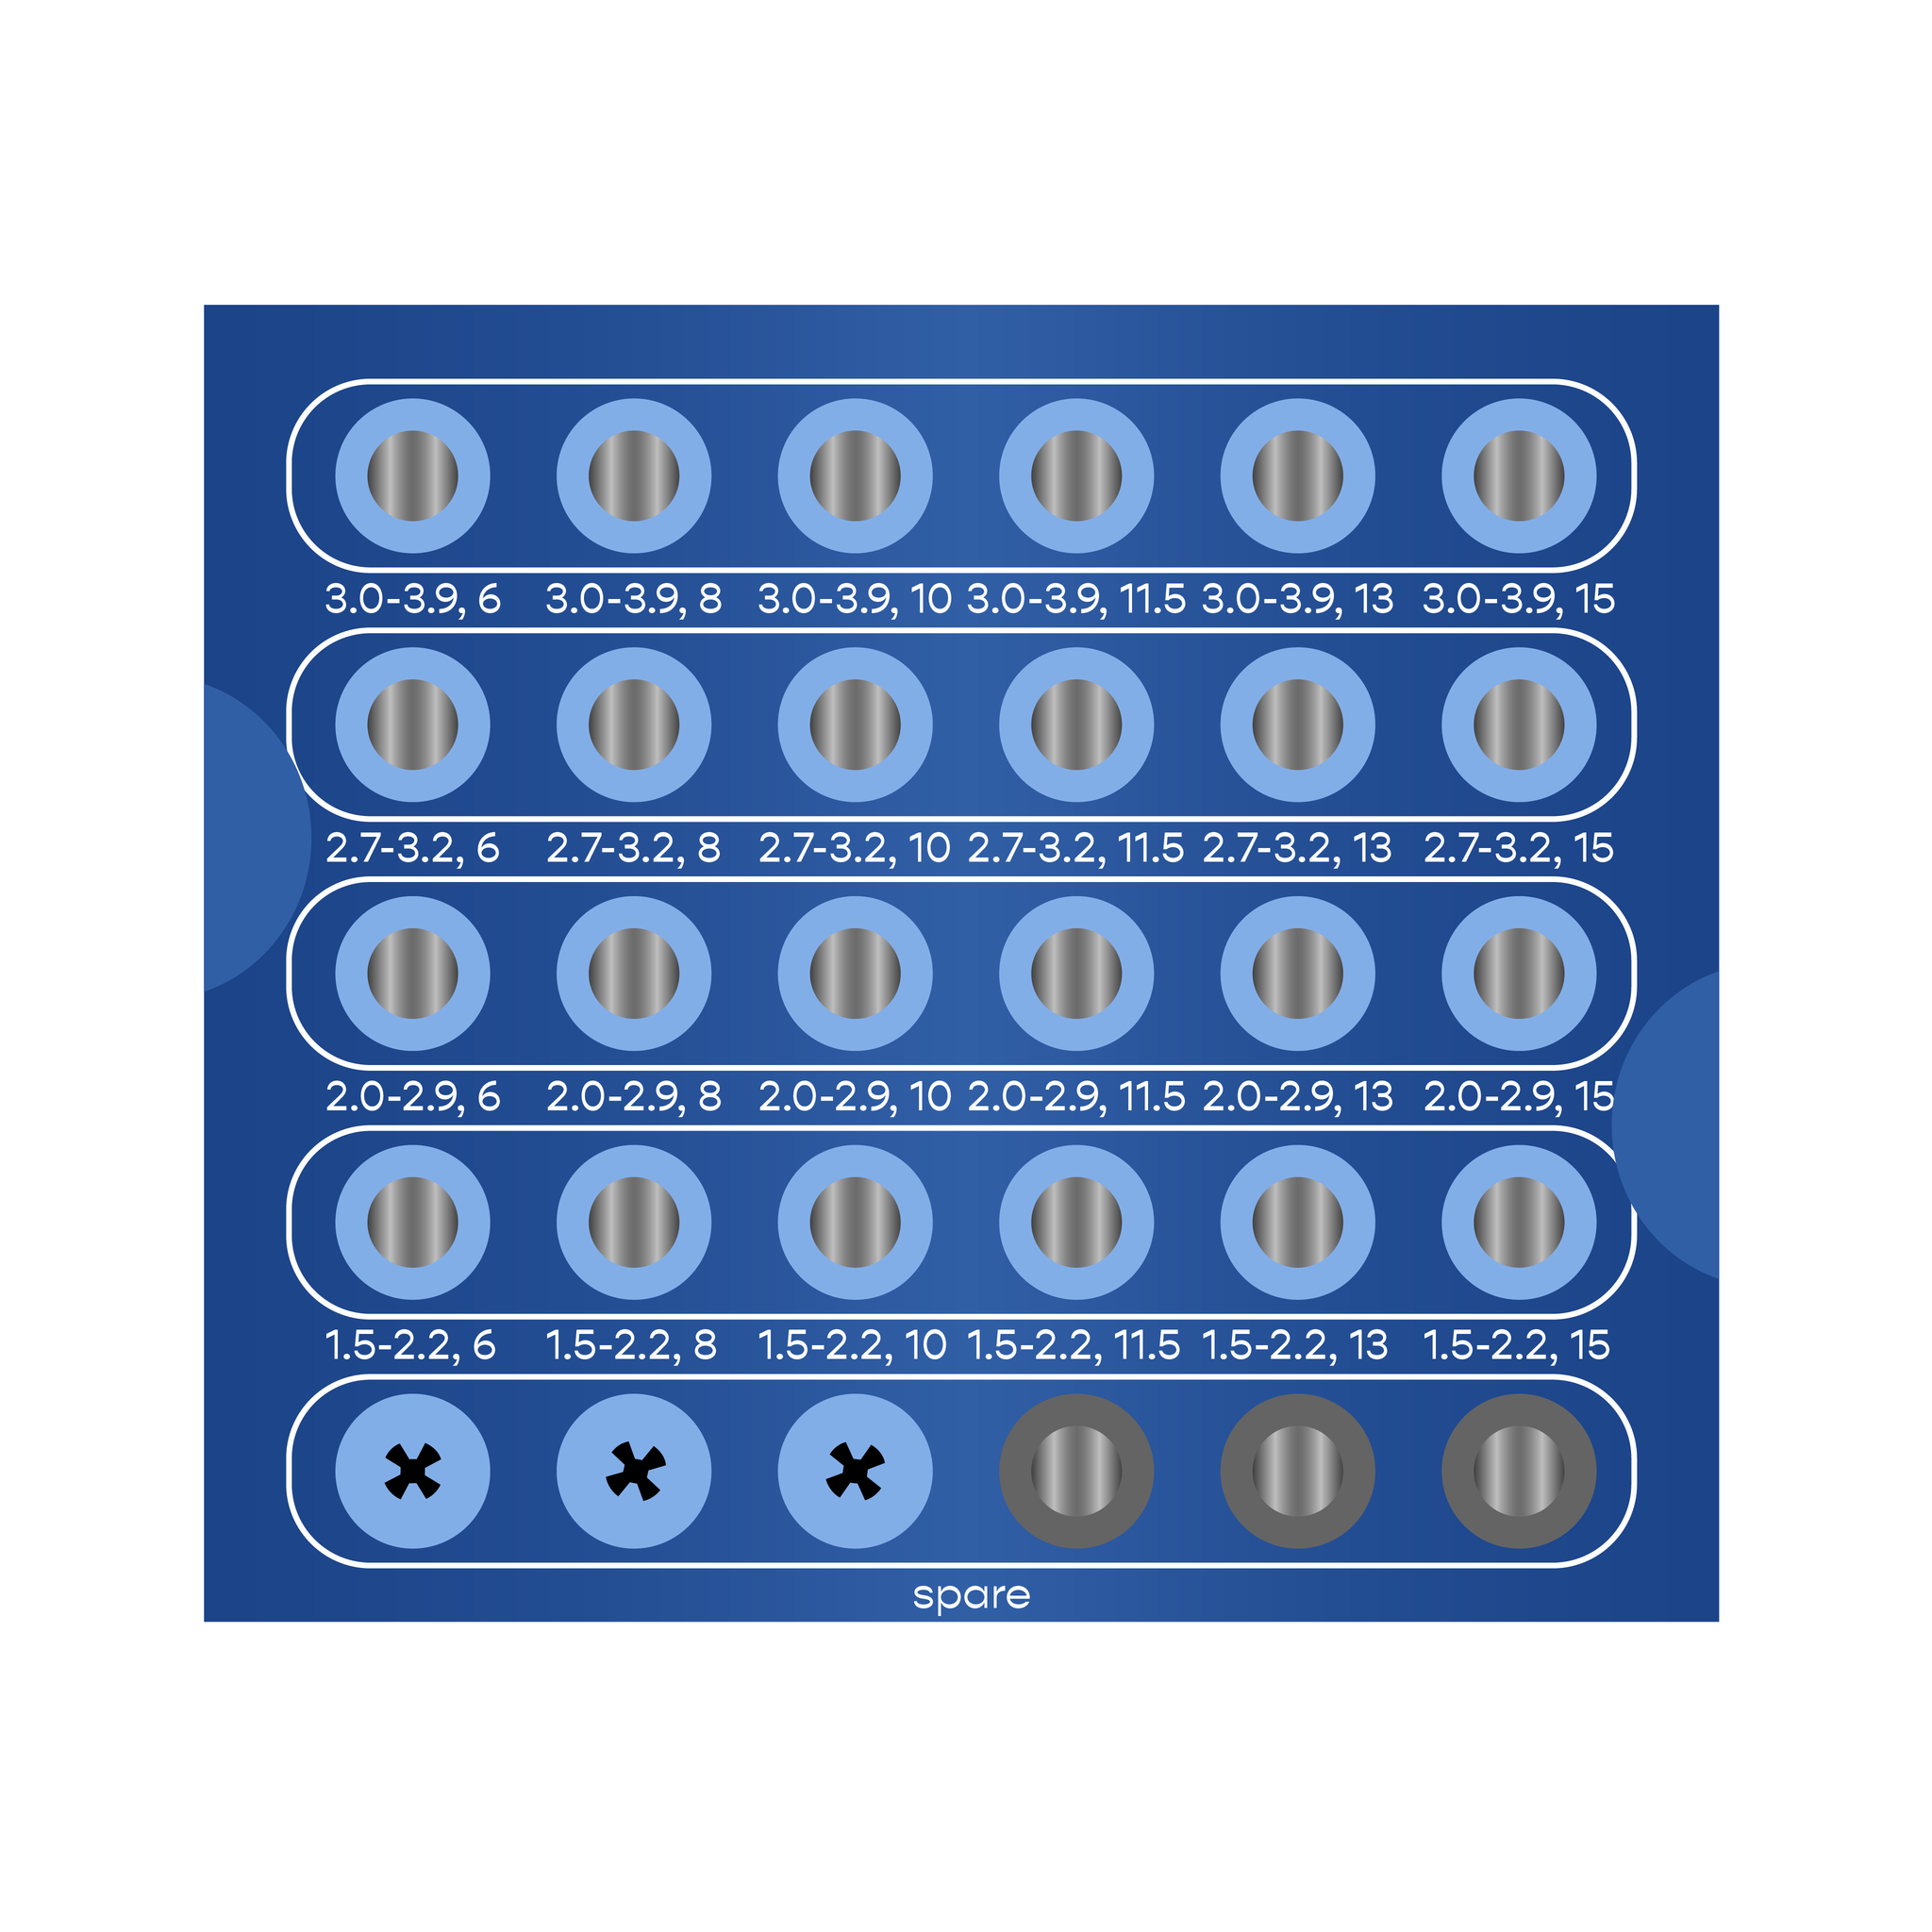 A blue square box with 5 rows of 6 drill storage slots each. The top row starts with 3.0 to 3.9 millimeter diameter drills in lengths from 6 to 15 millimeters. The bottom row ends with 1.5 to 2.2 millimeter diameter drills in lengths from 6 to 15 millimeters.